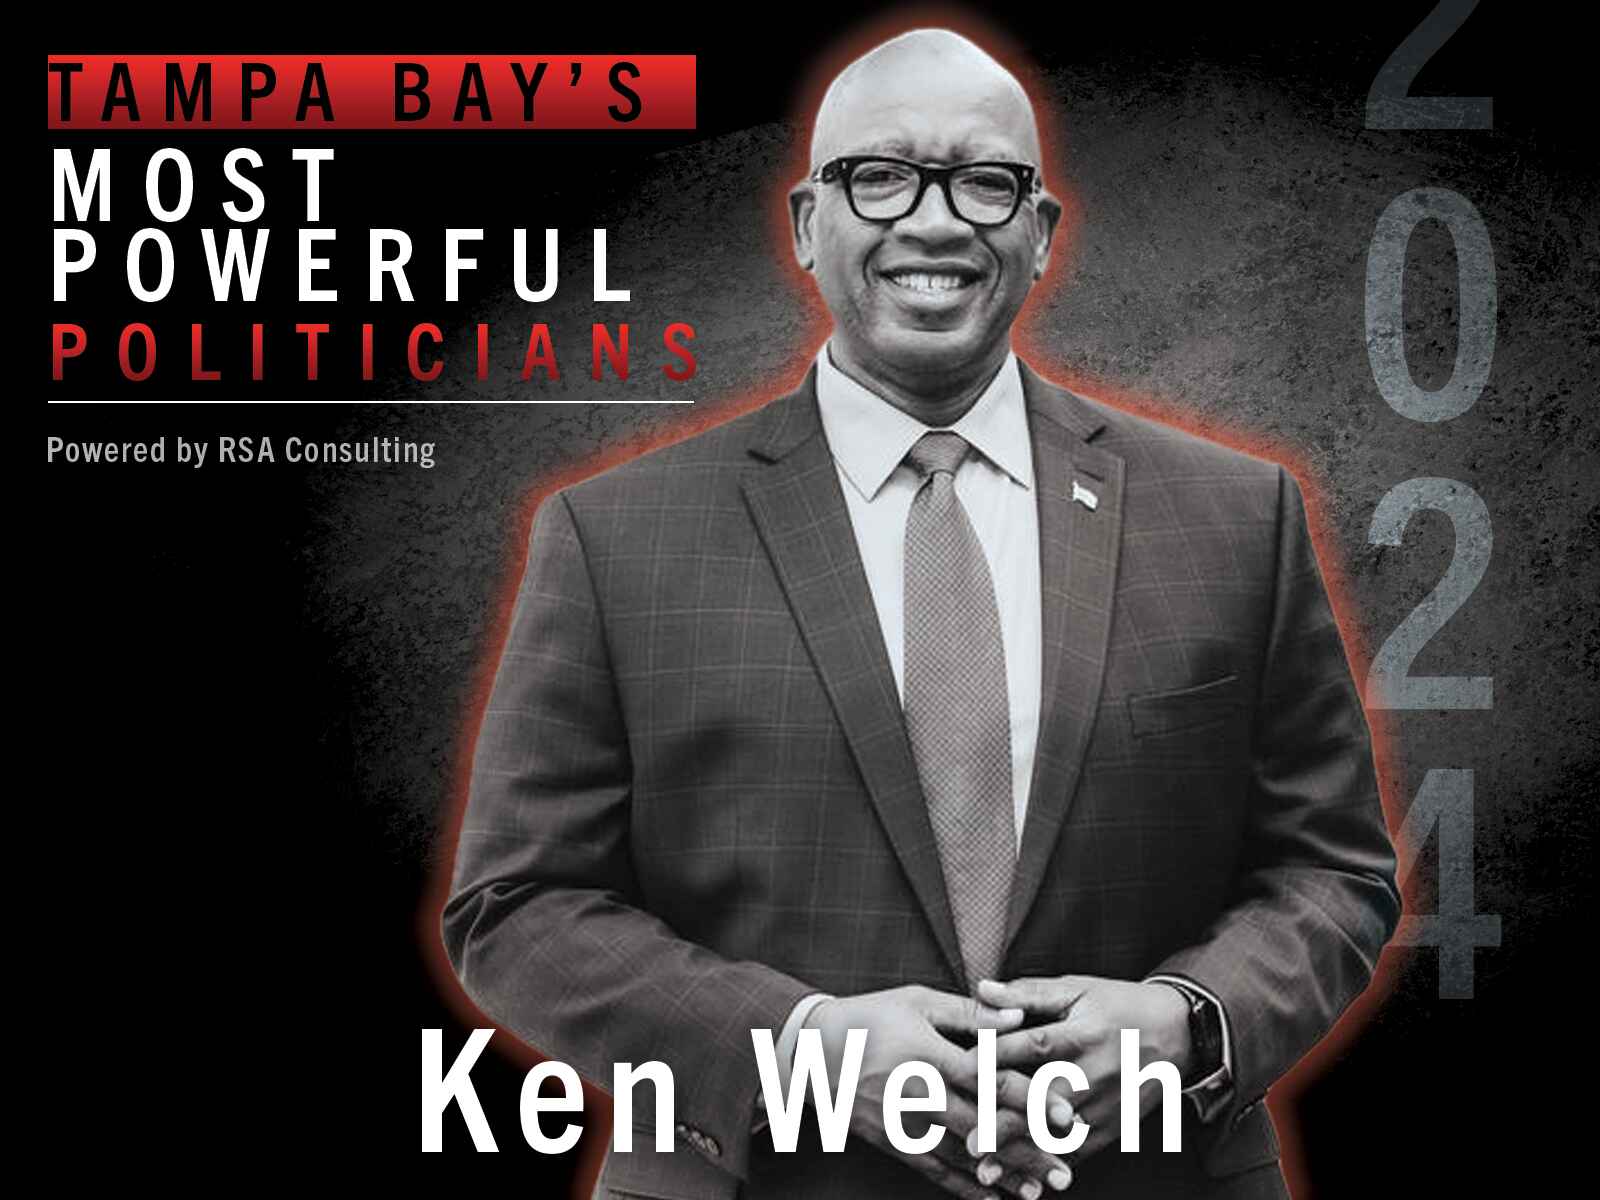  No. 4 on the list of Tampa Bay’s Most Powerful Politicians: Ken Welch 